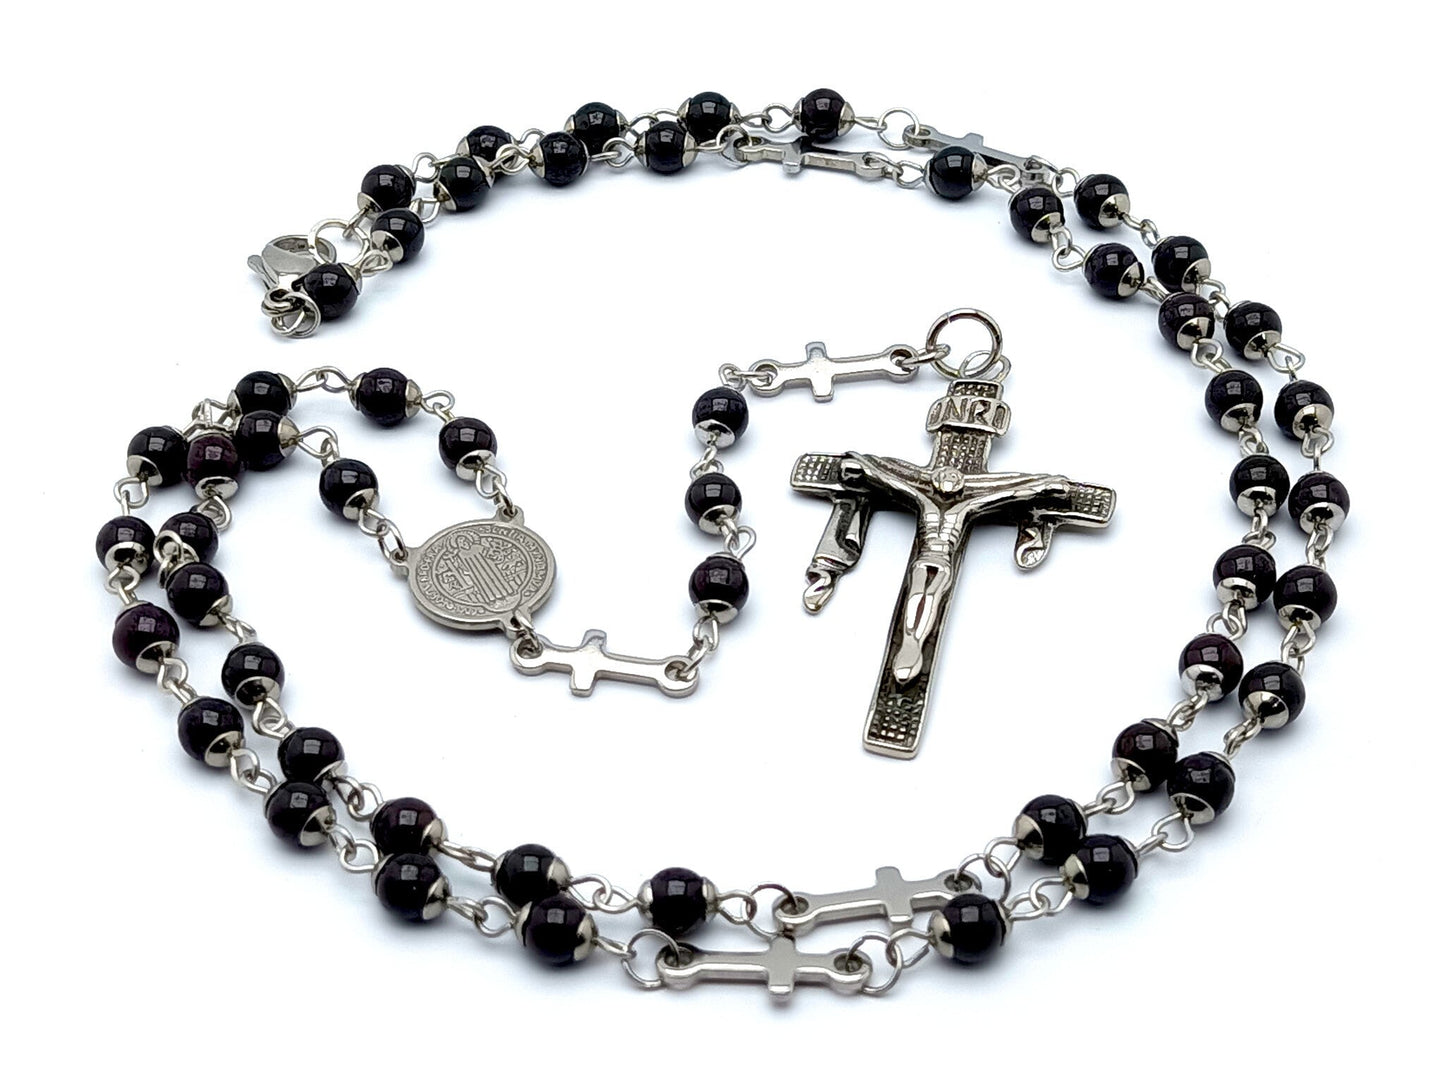 Saint Benedict unique rosary beads with onyx and stainless steel cross beads, stainless steel crucifix and Saint Benedict centre medal. 